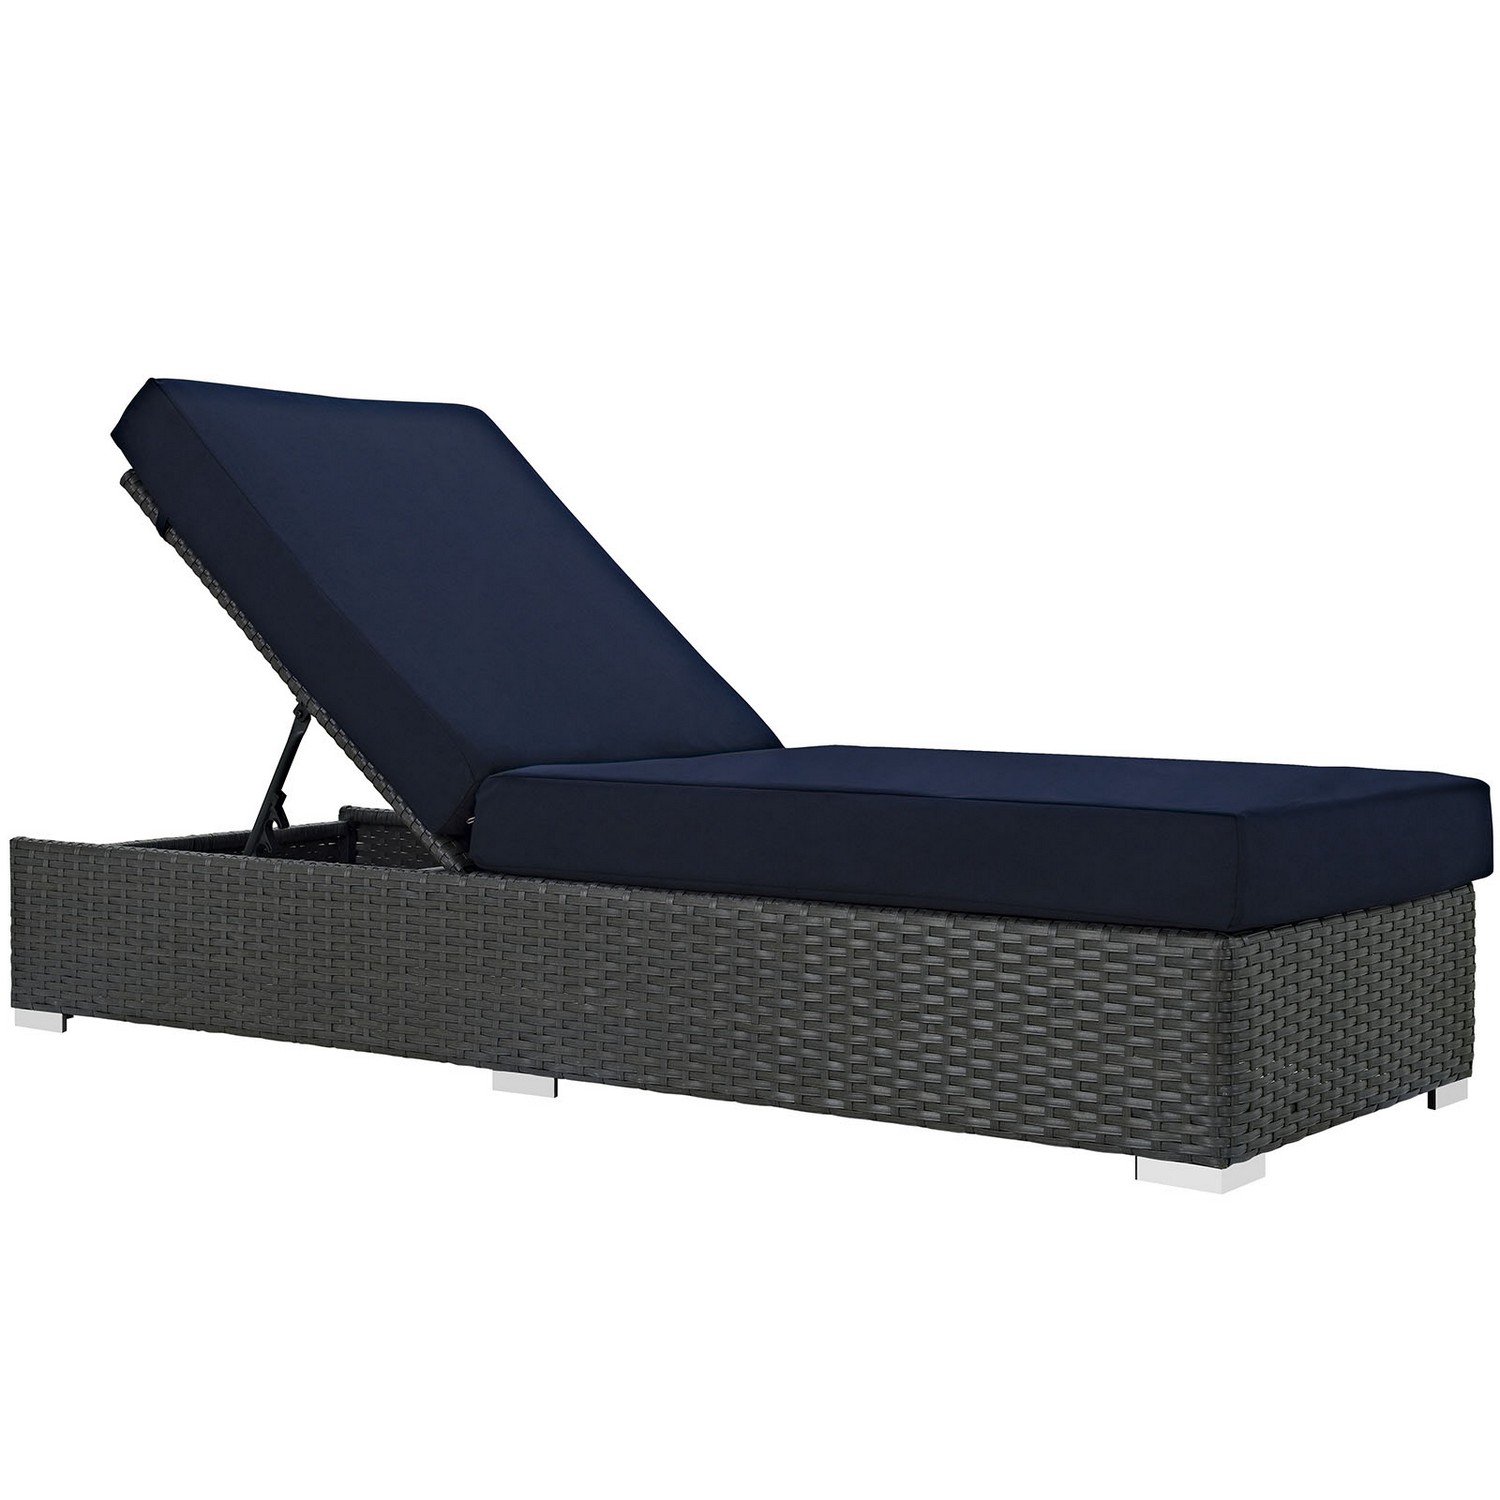 Modway Sojourn Outdoor Patio SunbrellaChaise Lounge - Canvas Navy